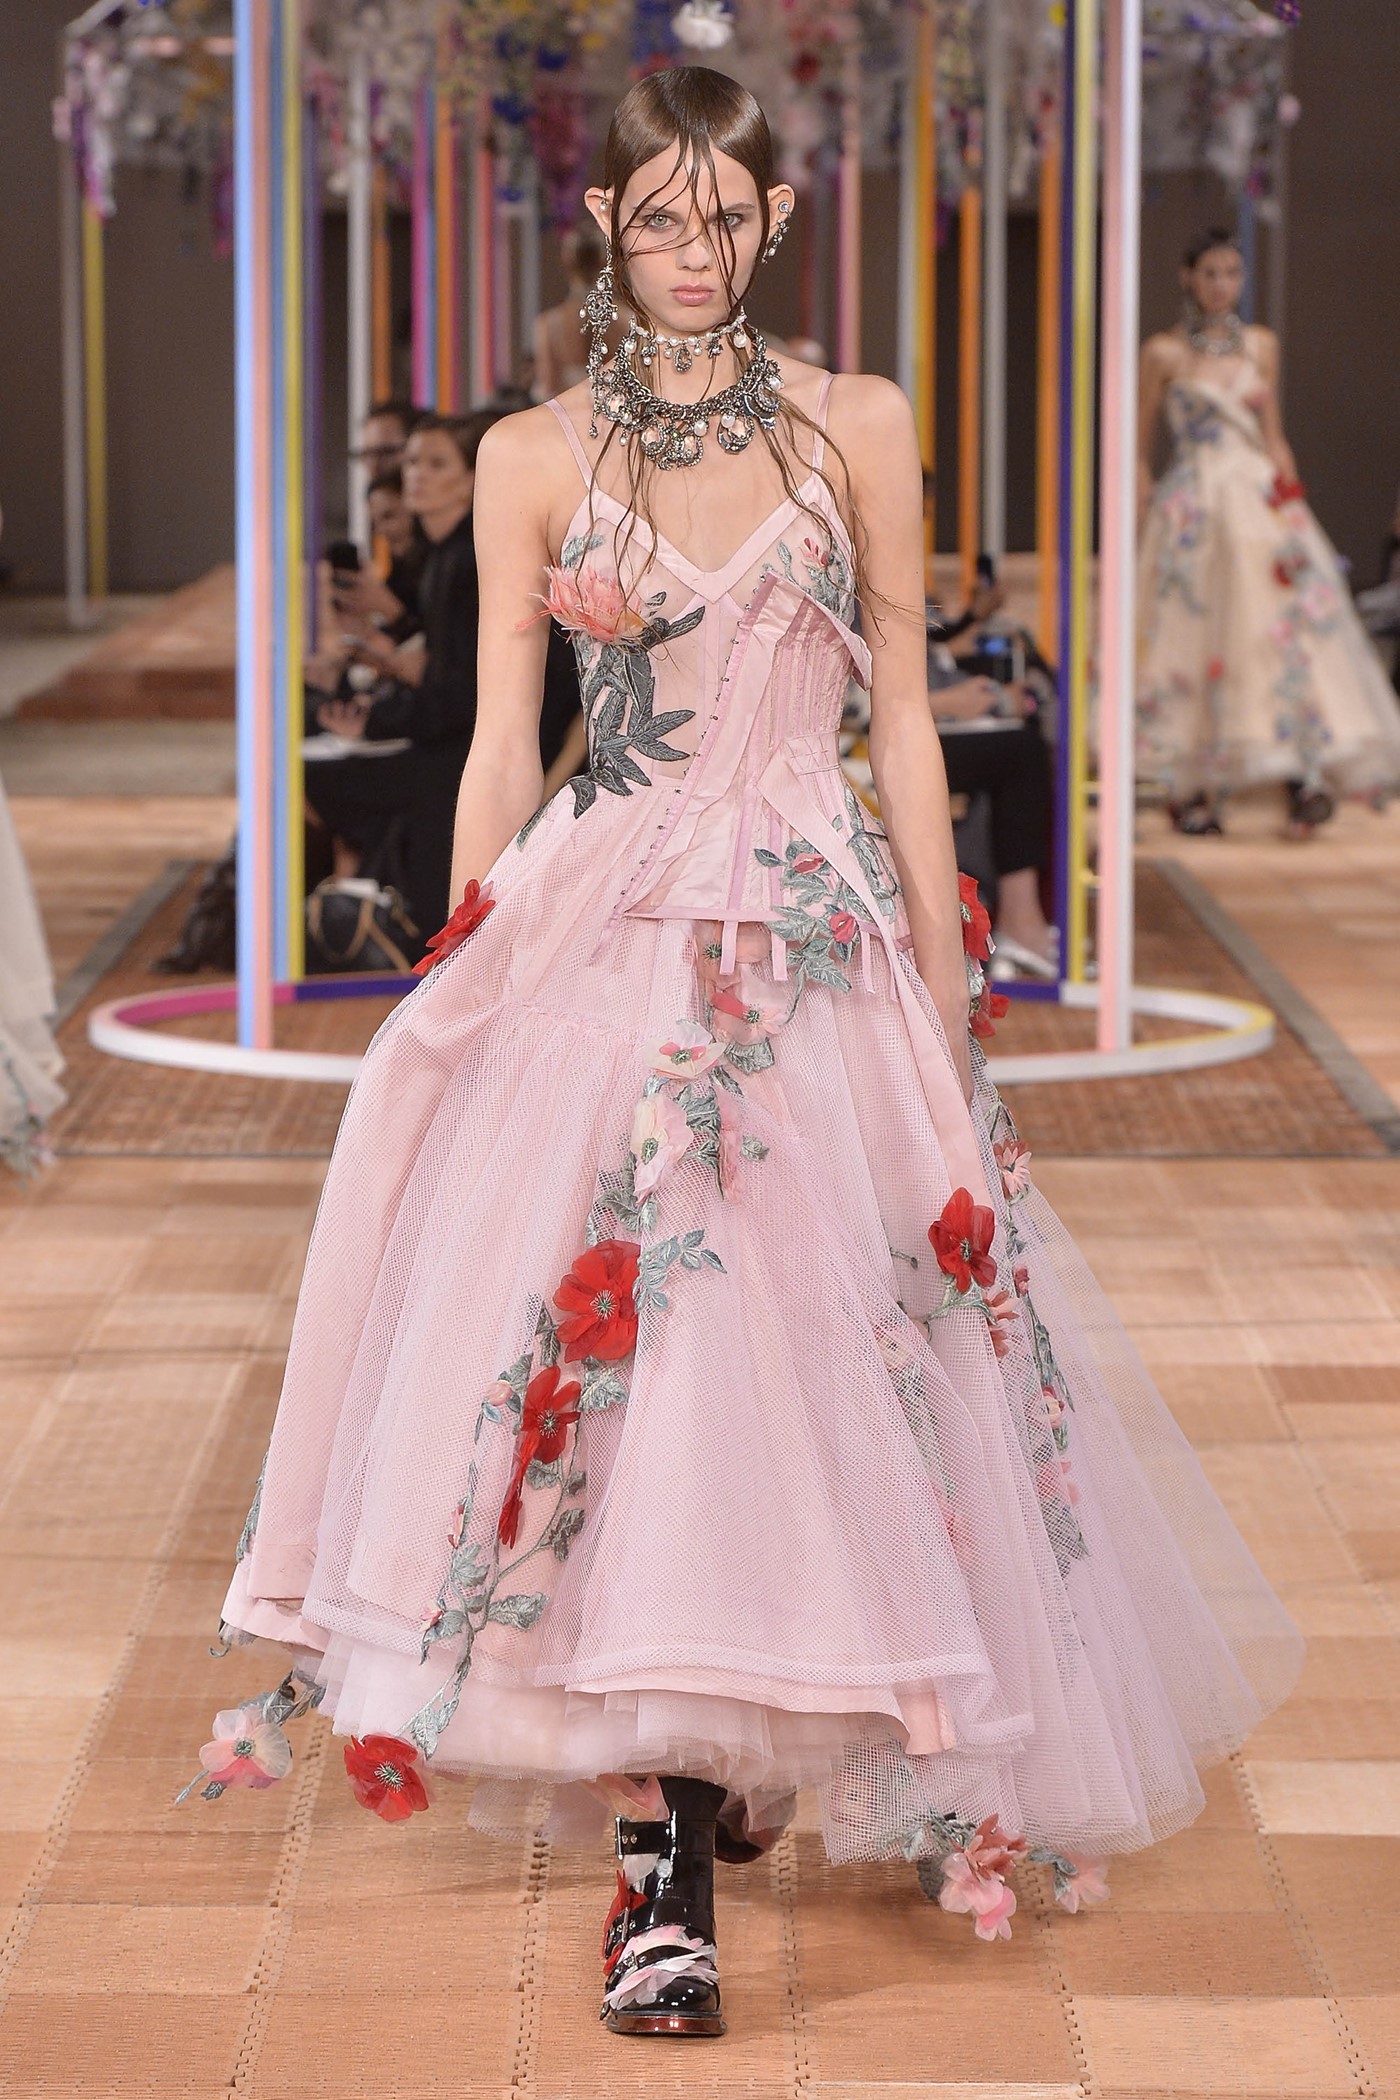 Alexander McQueen's Spring/Summer 2022 Collection is an Ode to